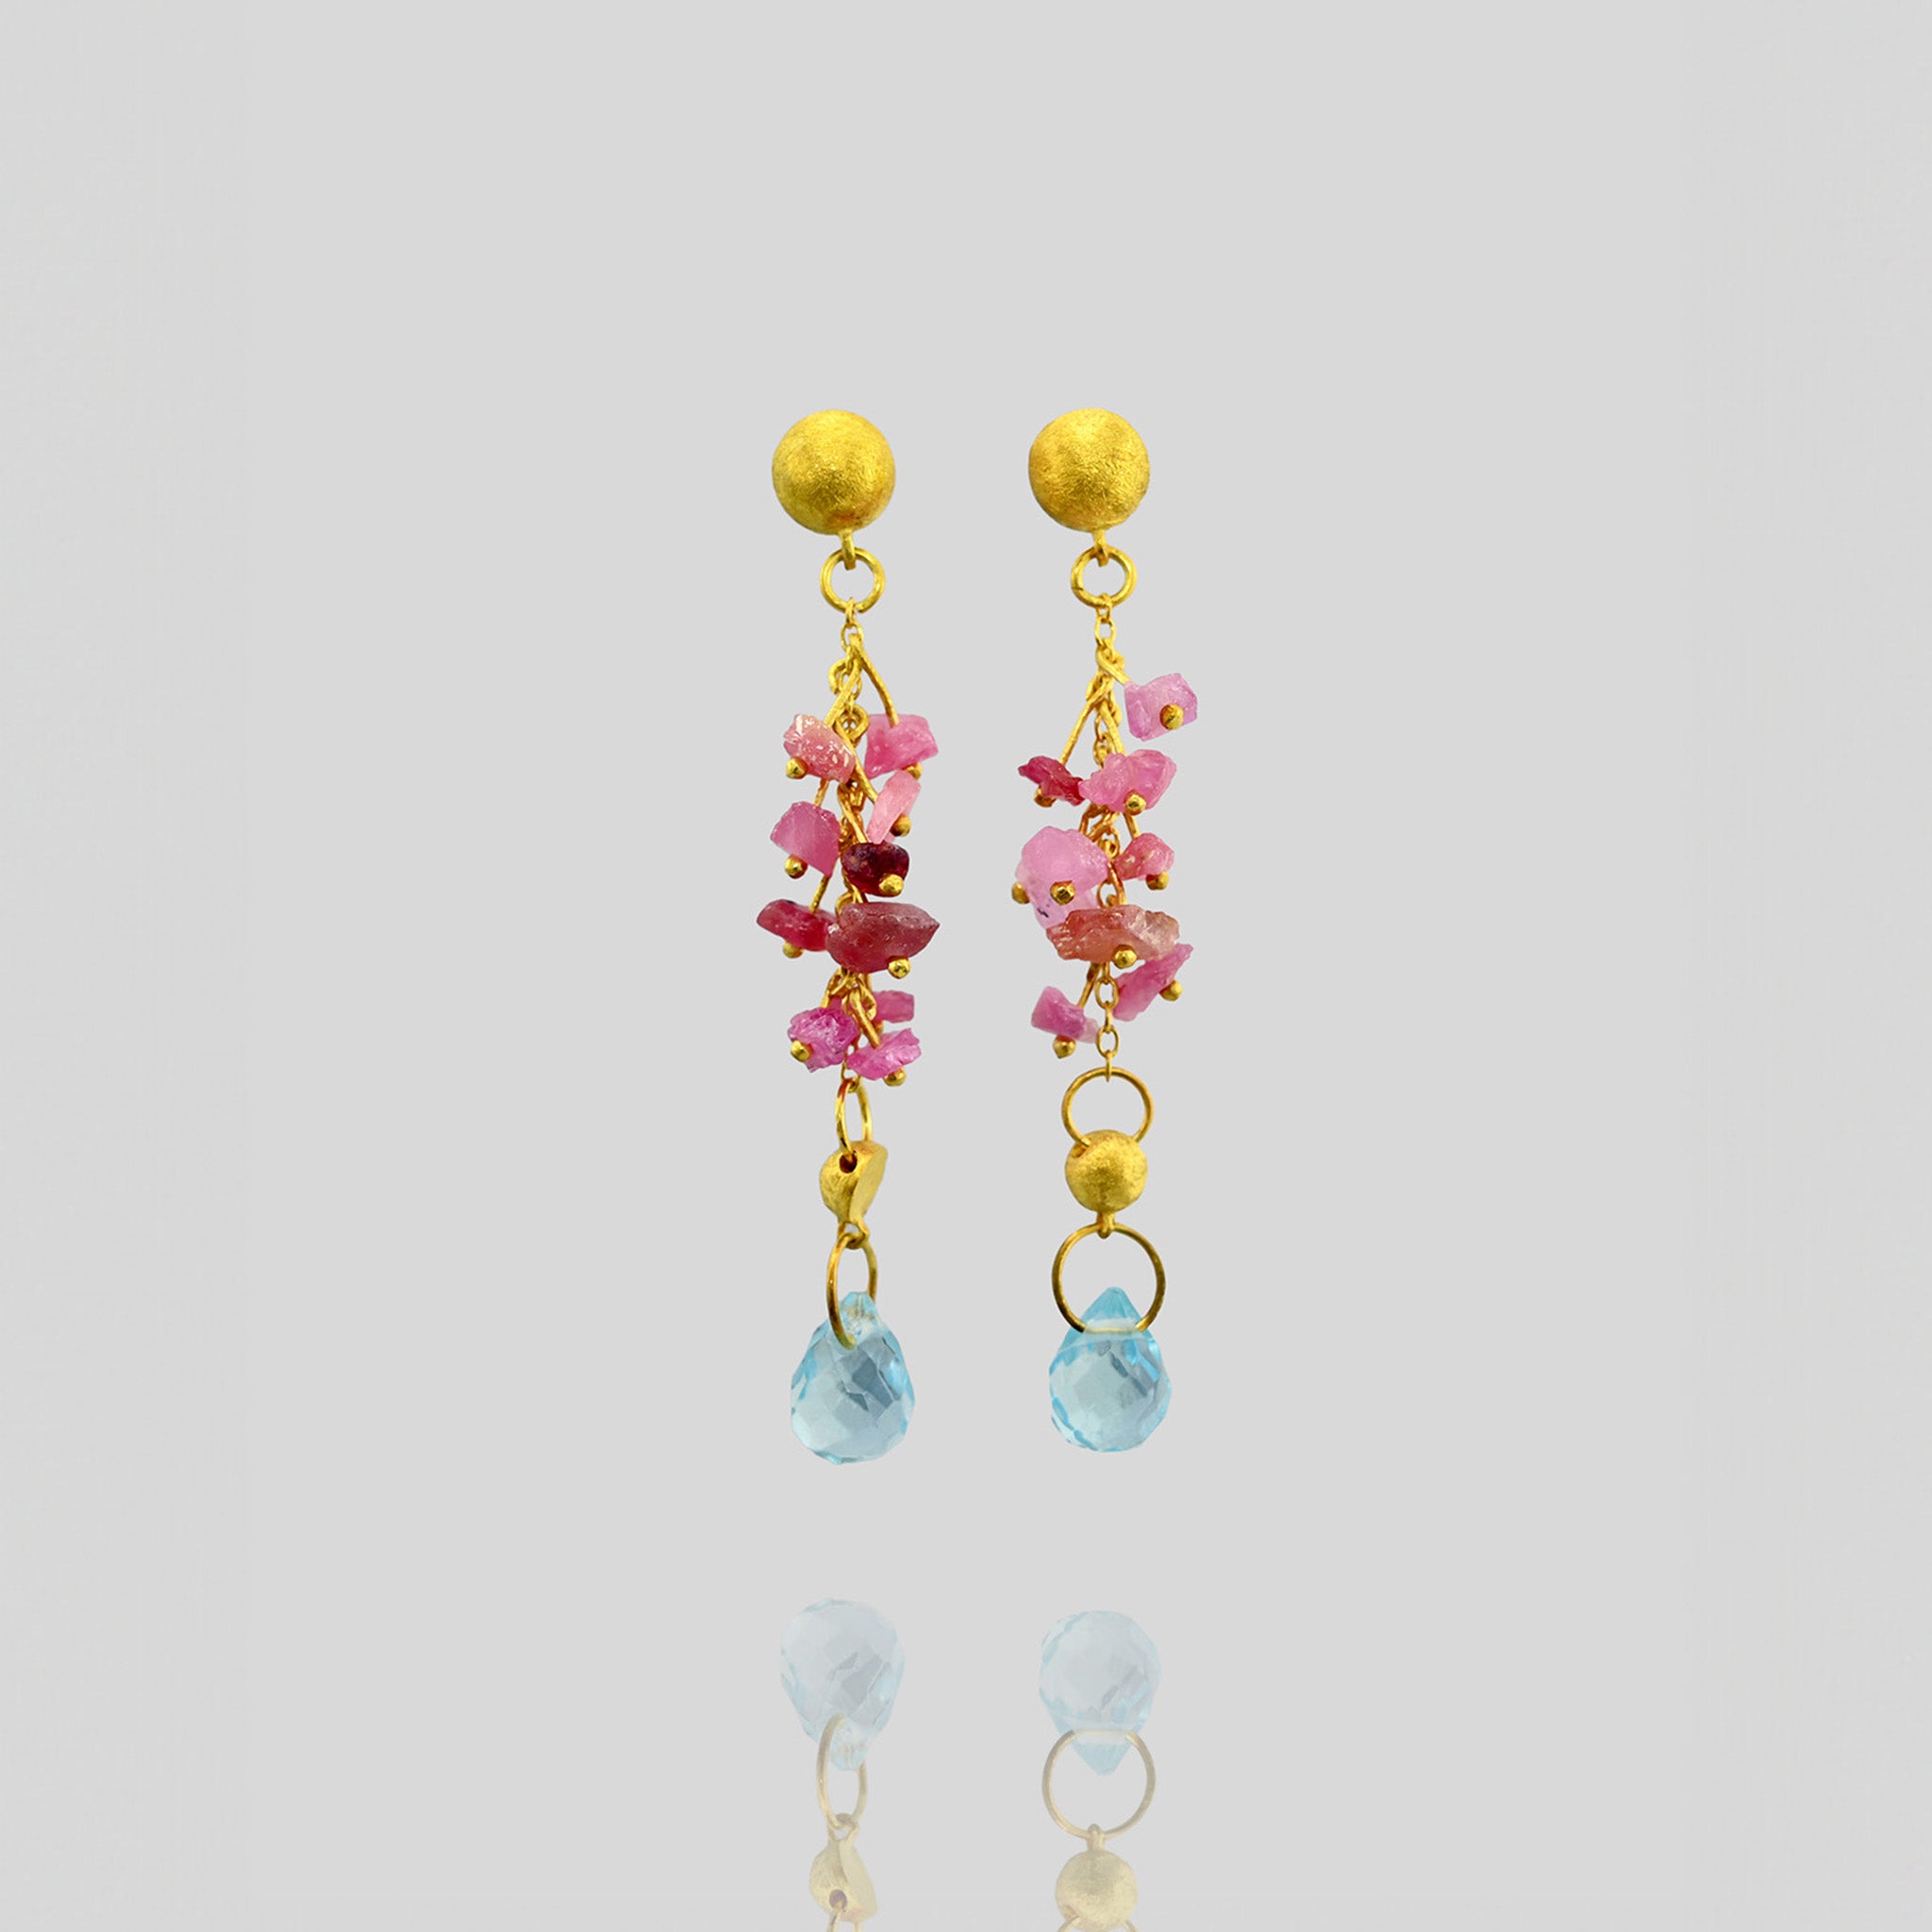 Detail of Elegant Venus Gold Earrings with Raw Pink Sapphires & Blue Topaz Drop - Unique Half Cap and Fine Gold Threads Design.